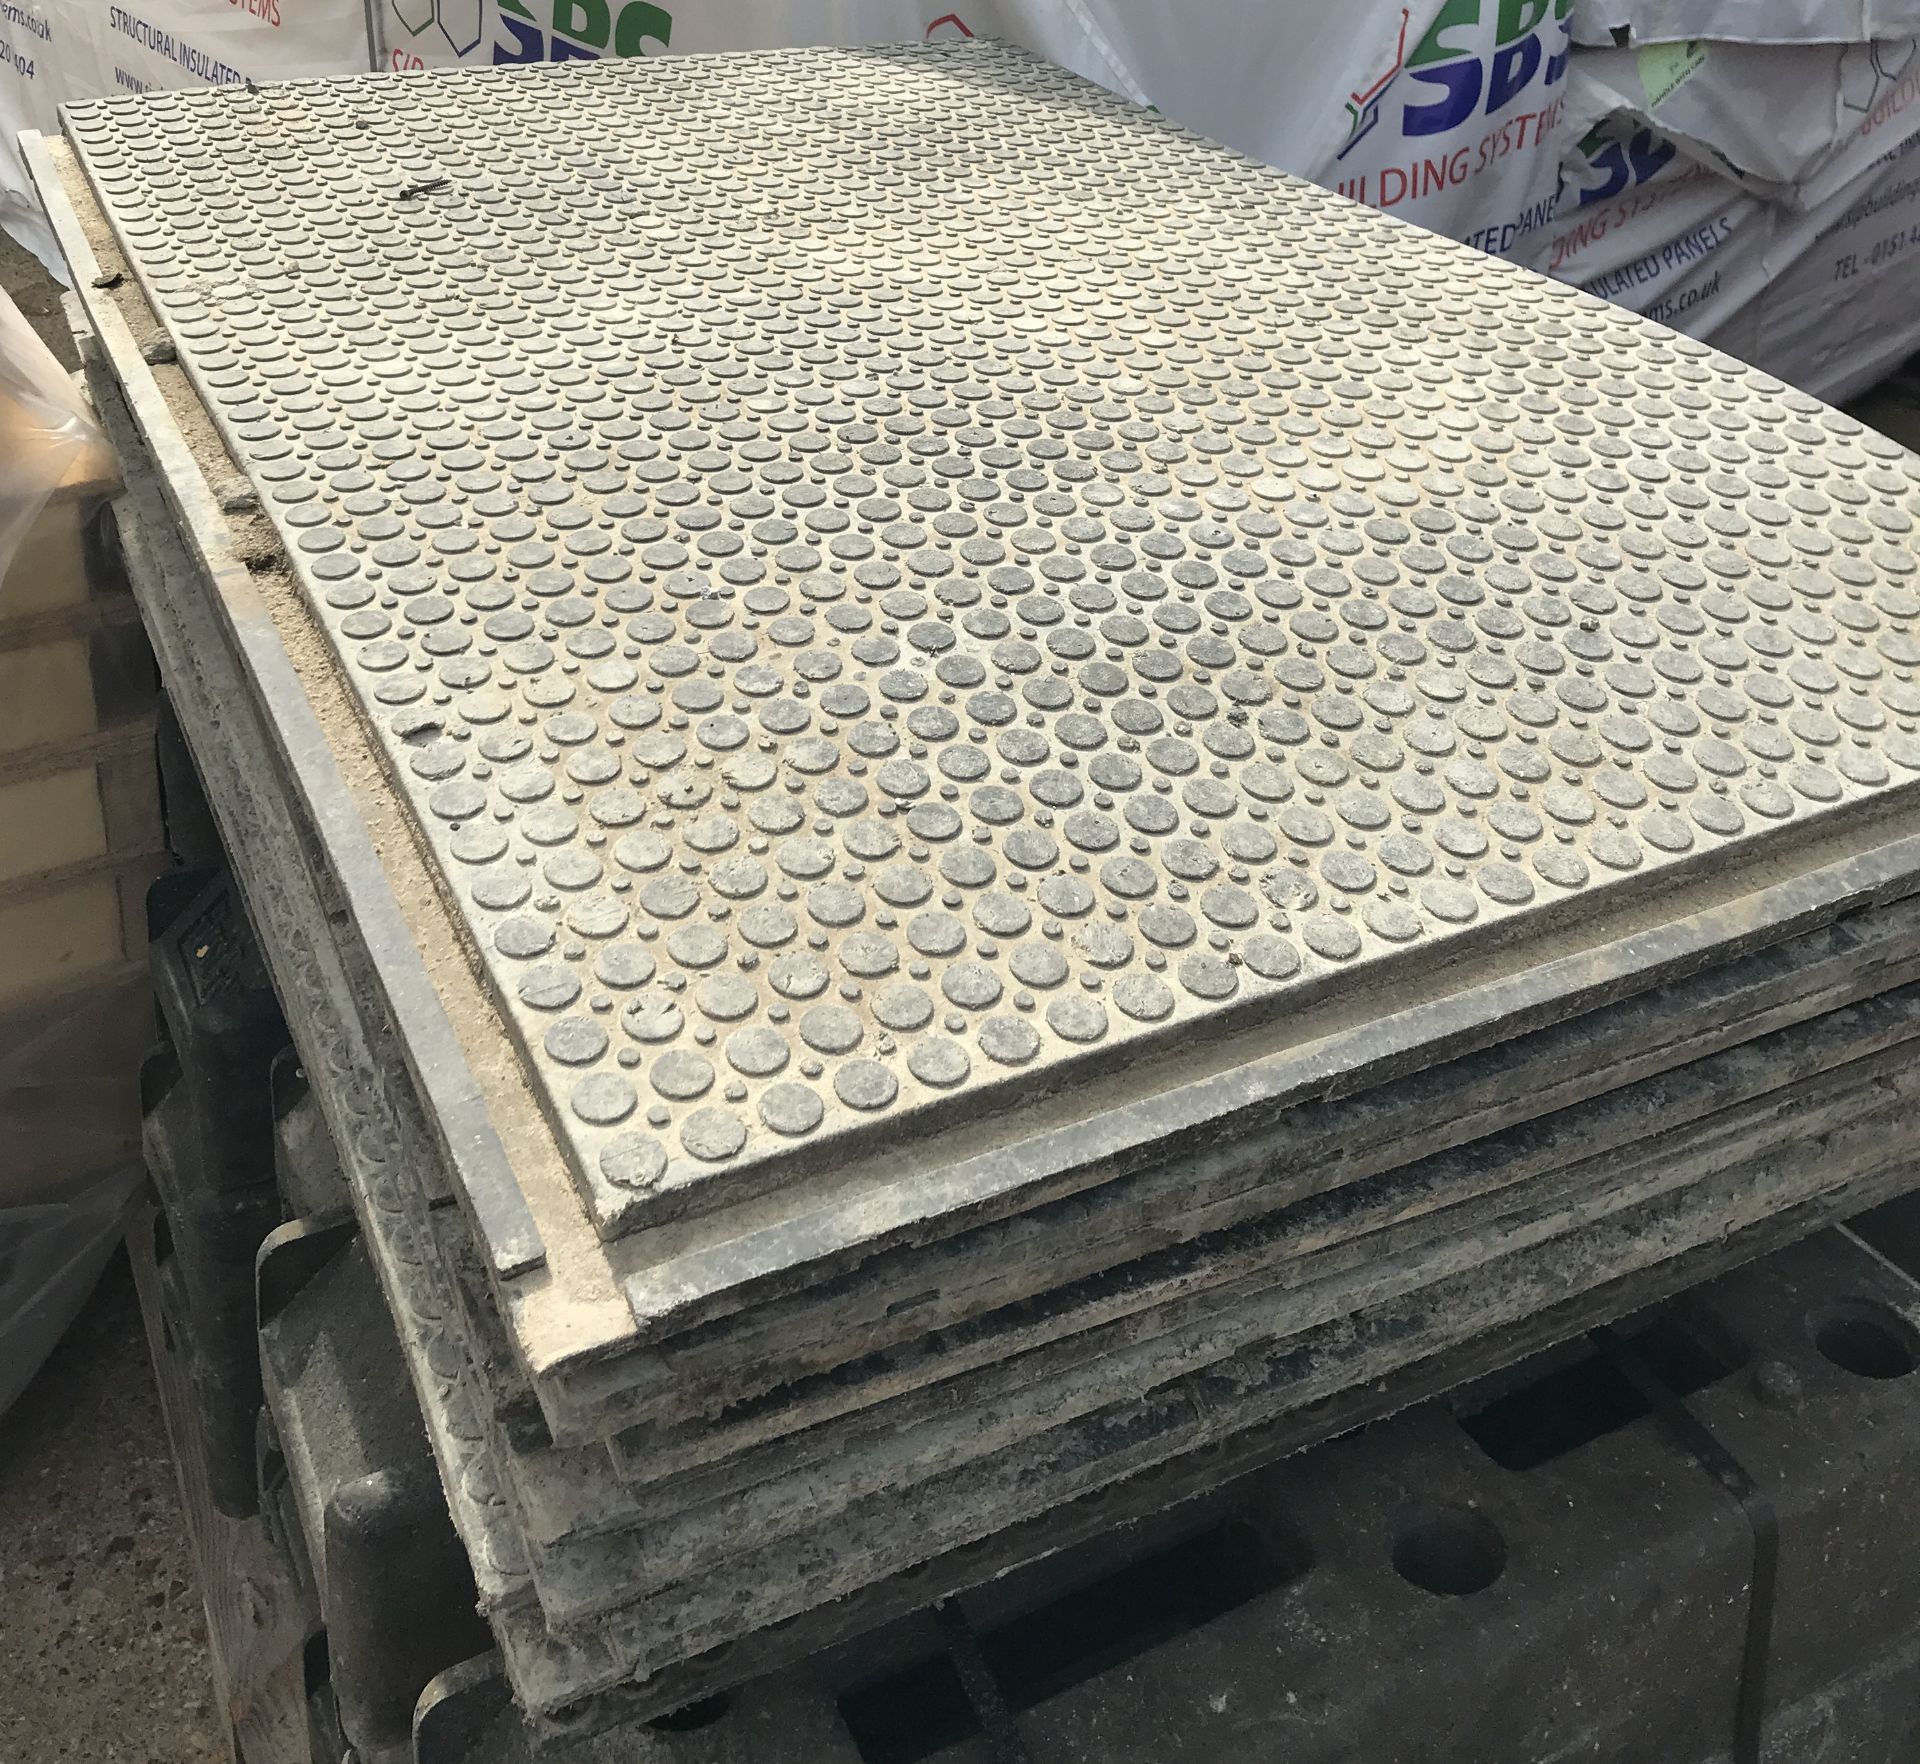 20 Temporary Rubber Mats, 1200x800mm (Located: Barton-le-Clay. Please Refer to General Notes) - Image 2 of 2